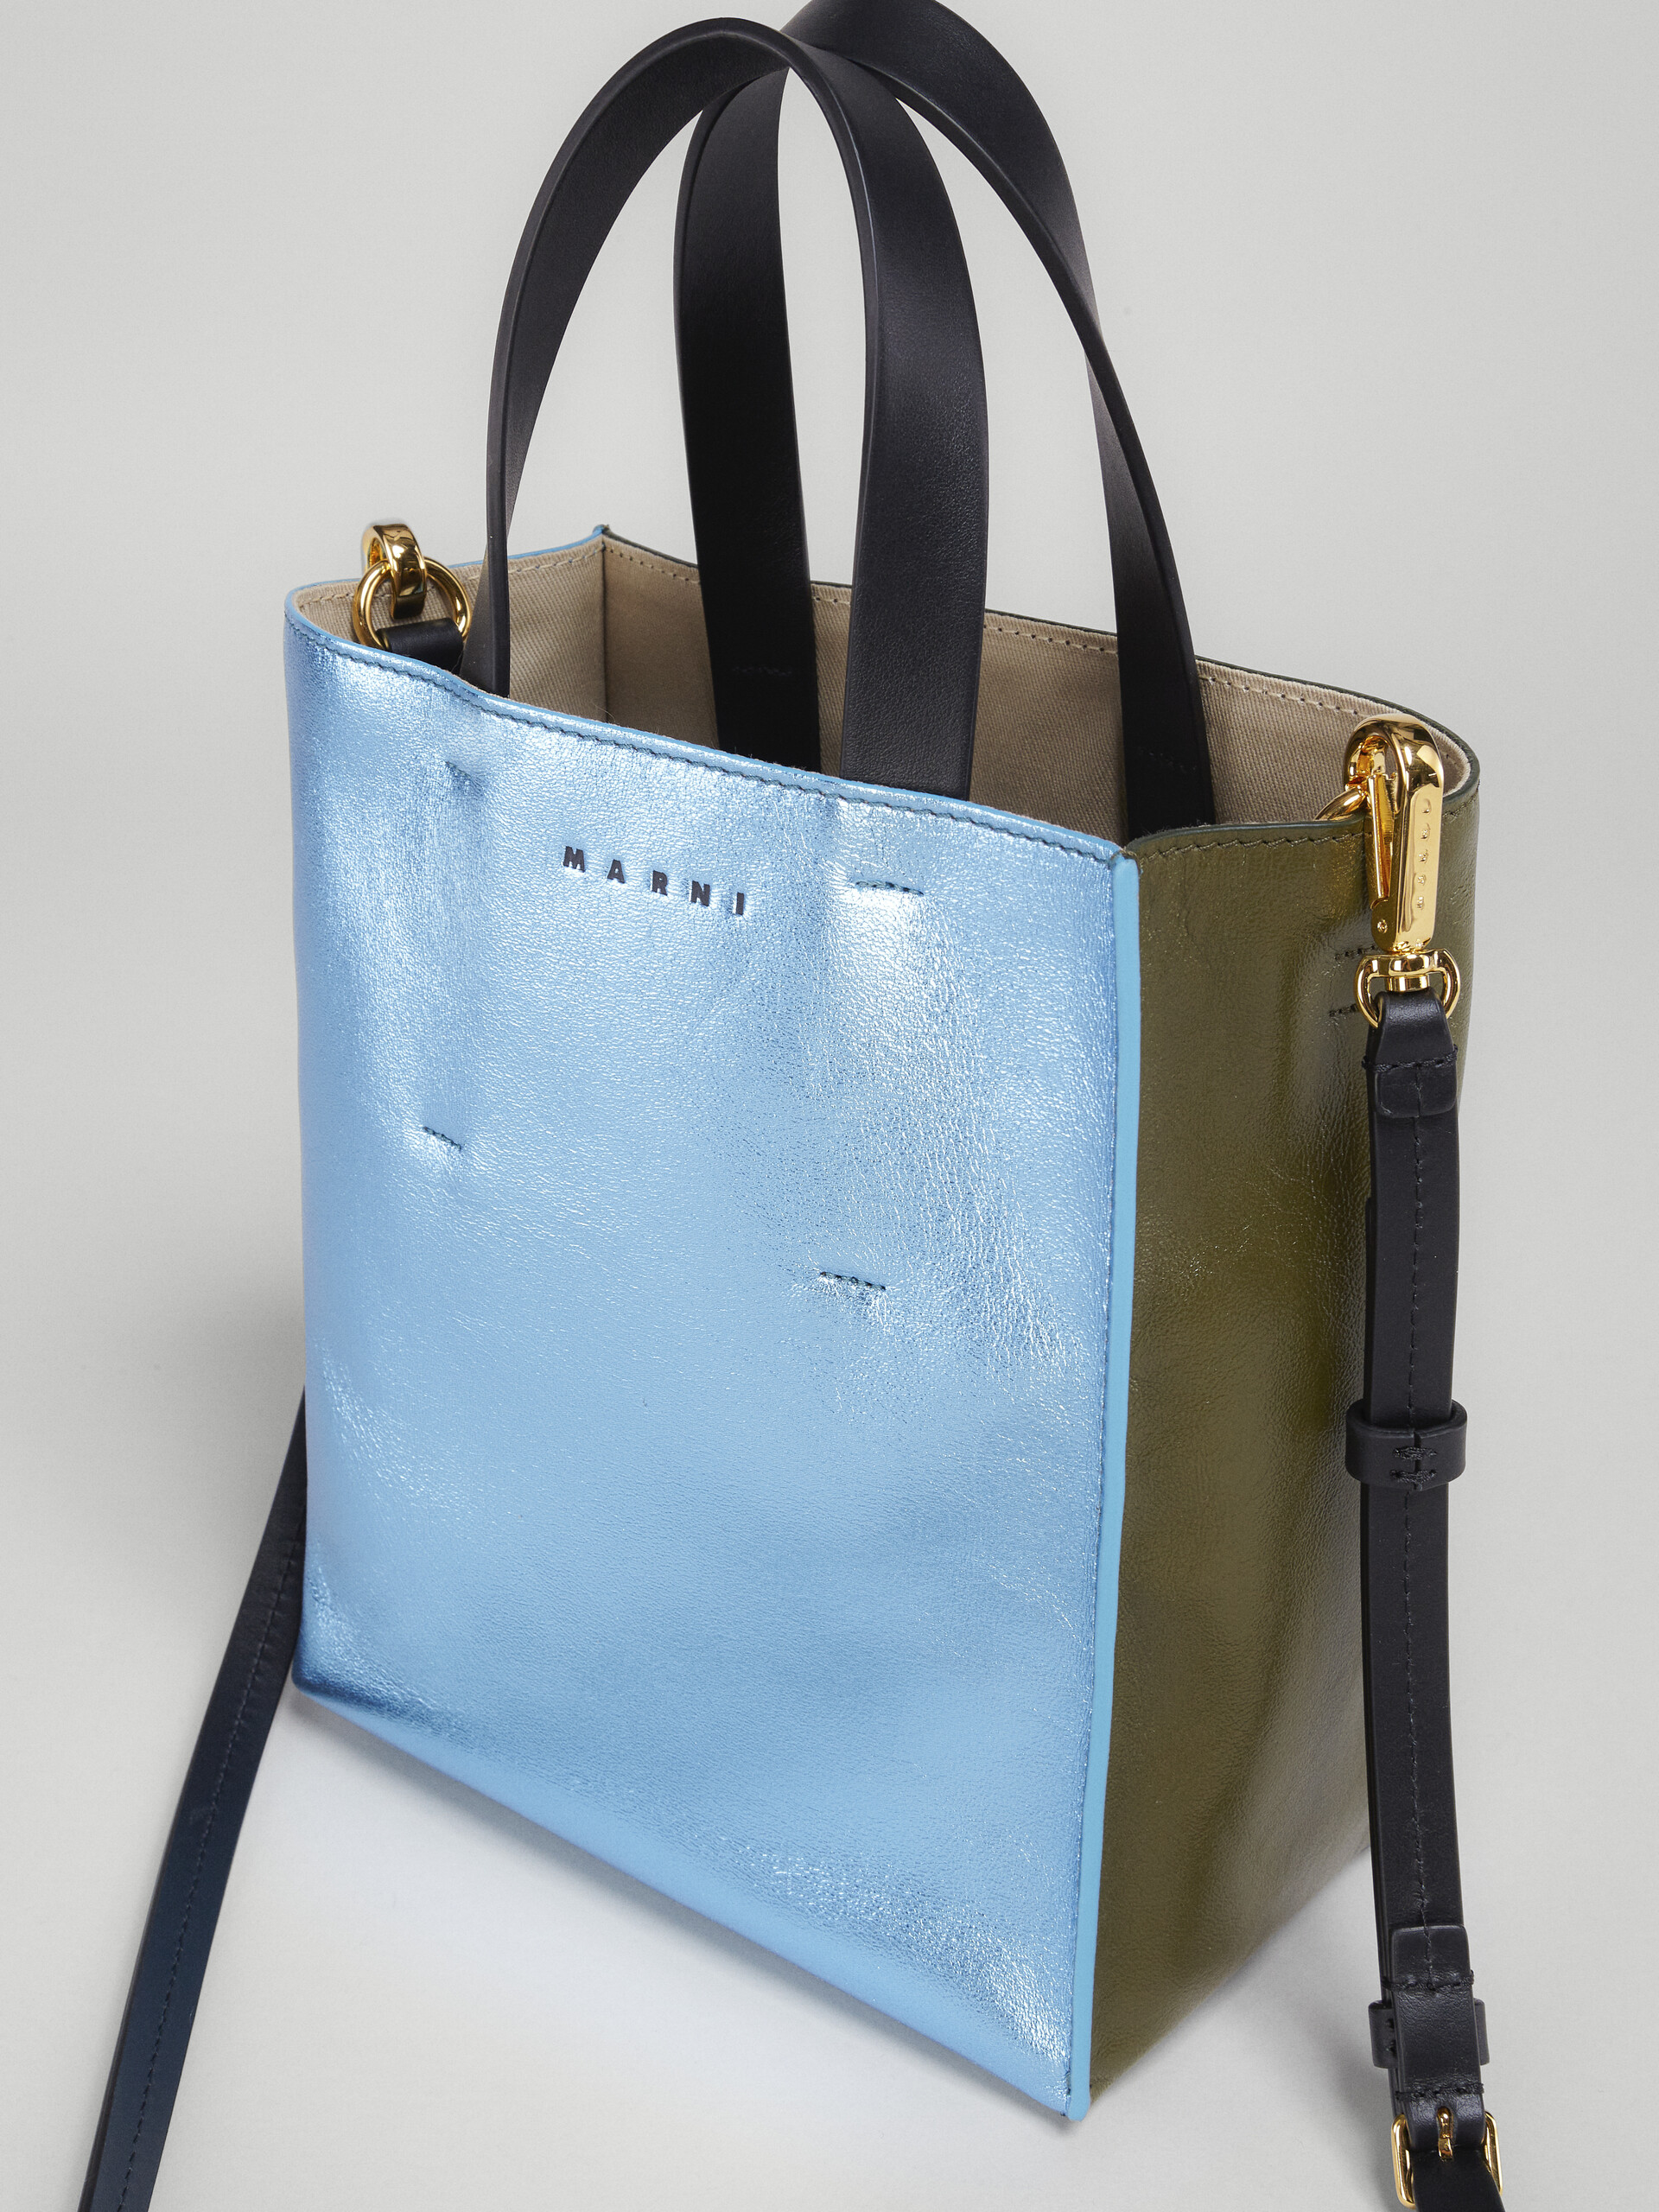 MUSEO mini bag in pale blue and green metallic leather